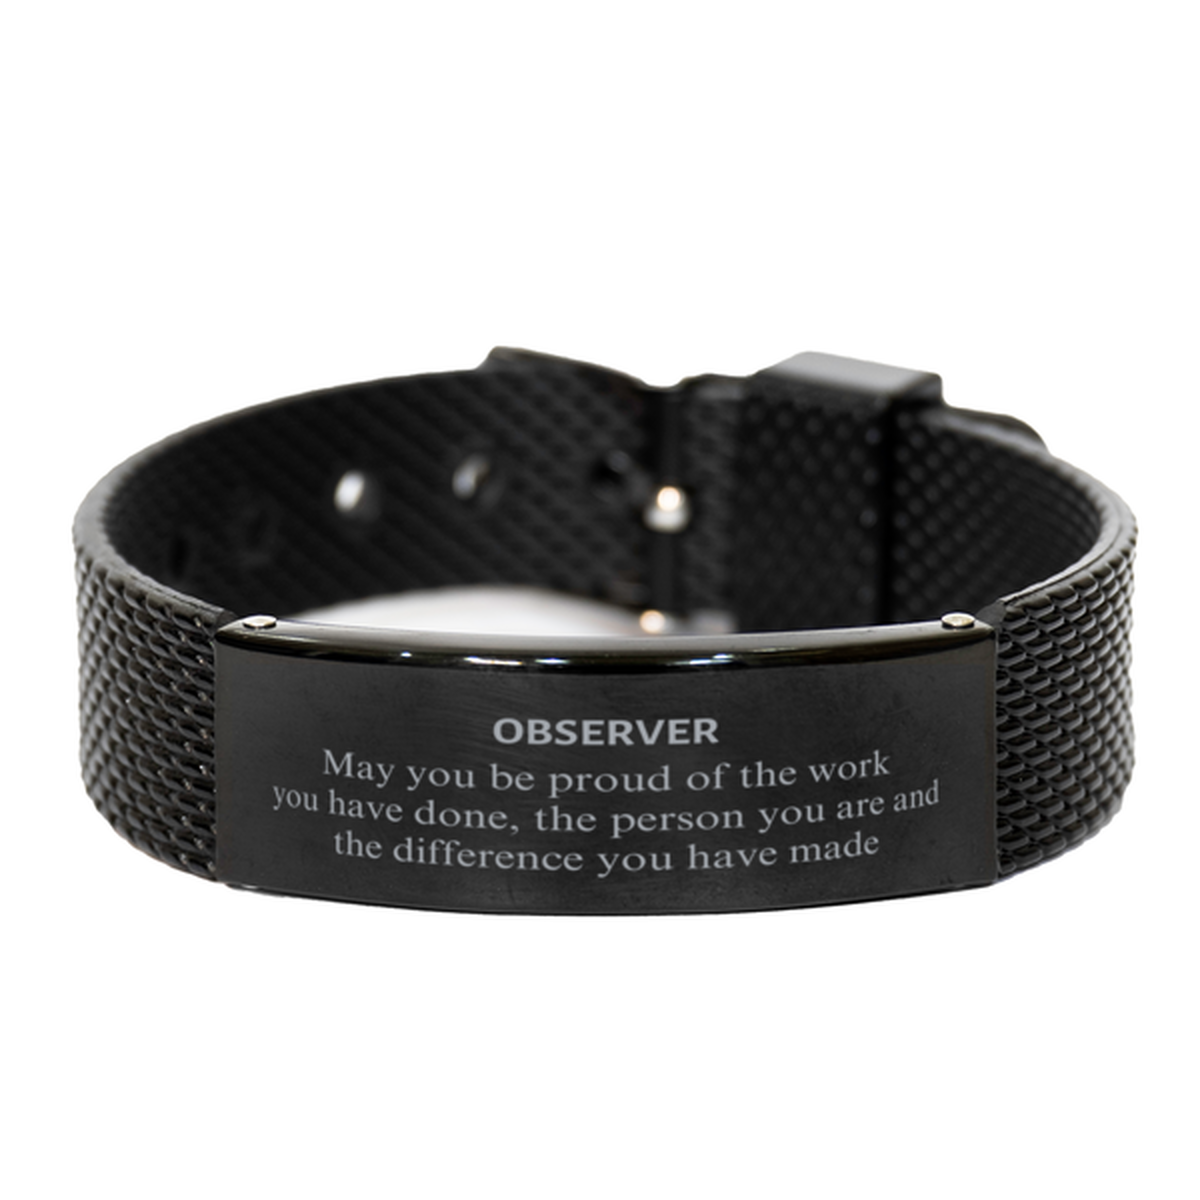 Observer May you be proud of the work you have done, Retirement Observer Black Shark Mesh Bracelet for Colleague Appreciation Gifts Amazing for Observer